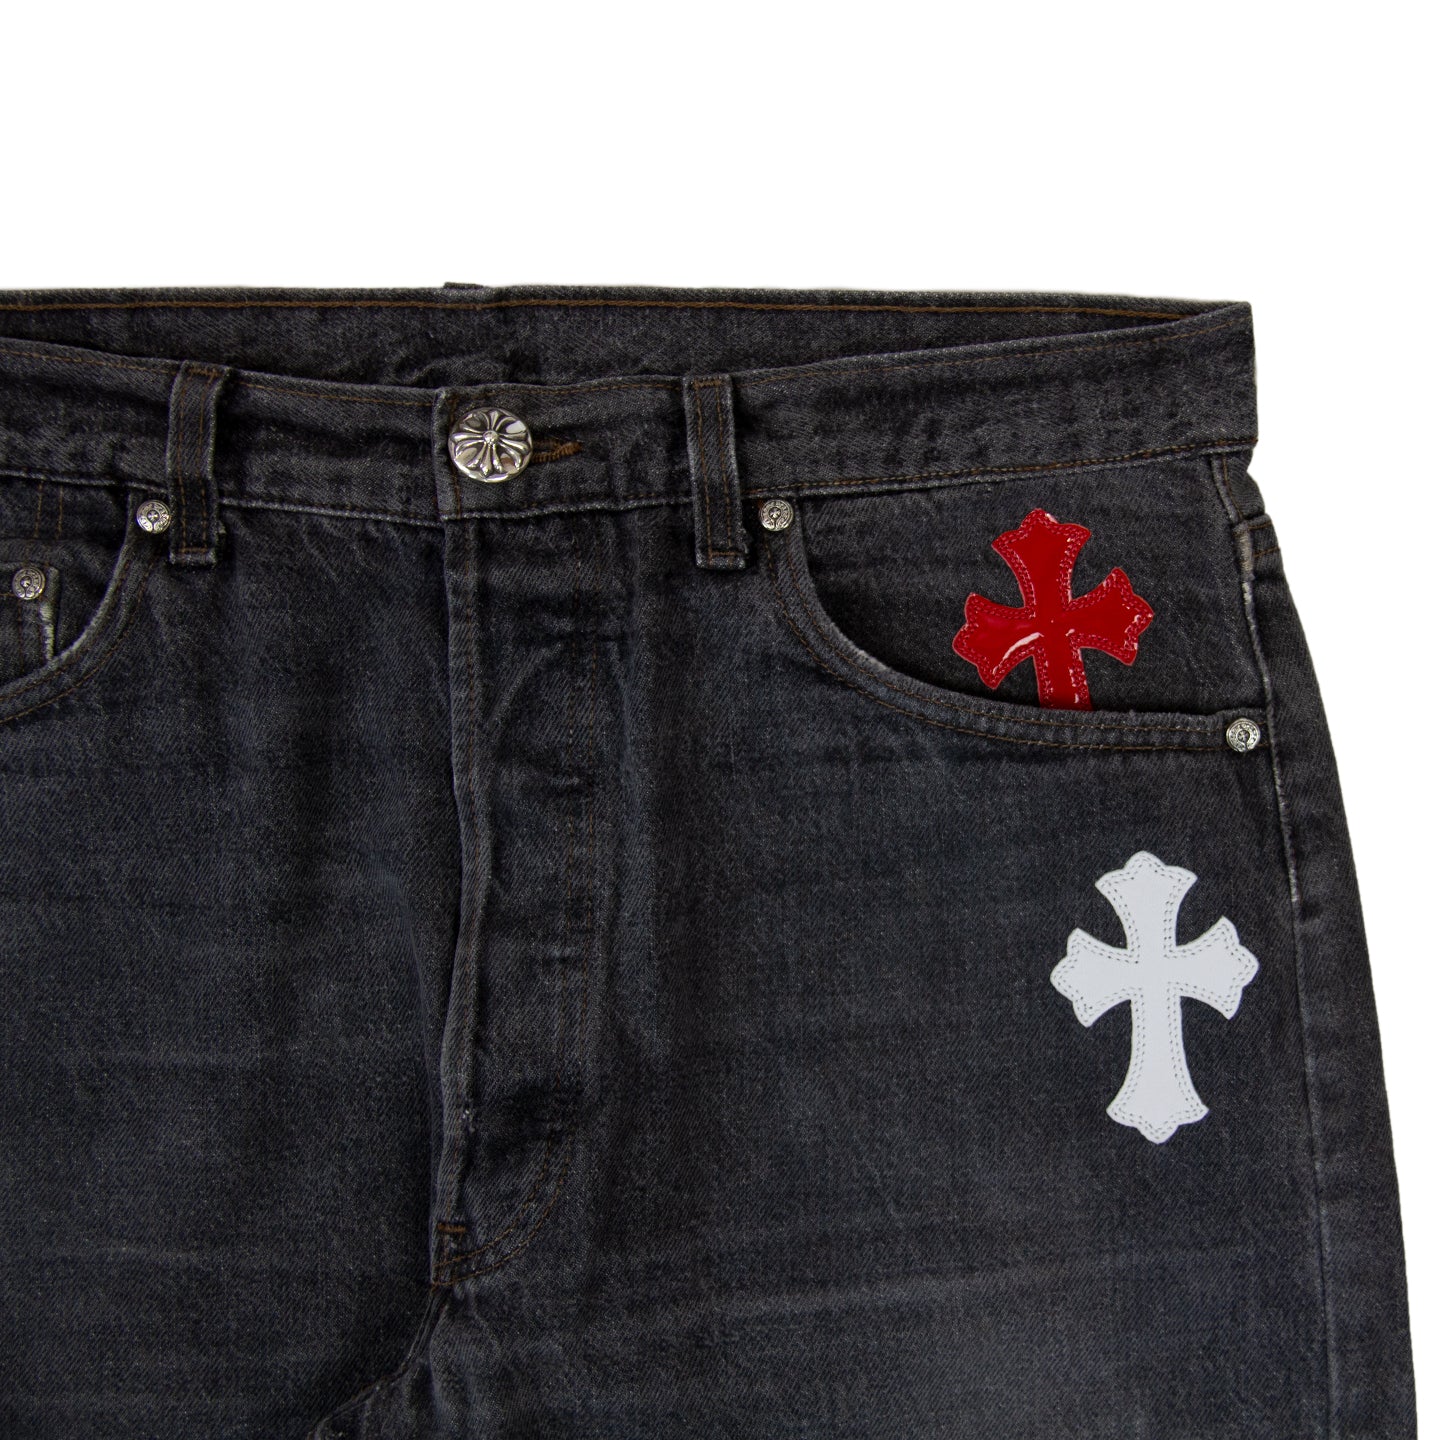 Chrome Hearts Denim Discussion: Yes or No and why? : r/ChromeHeart